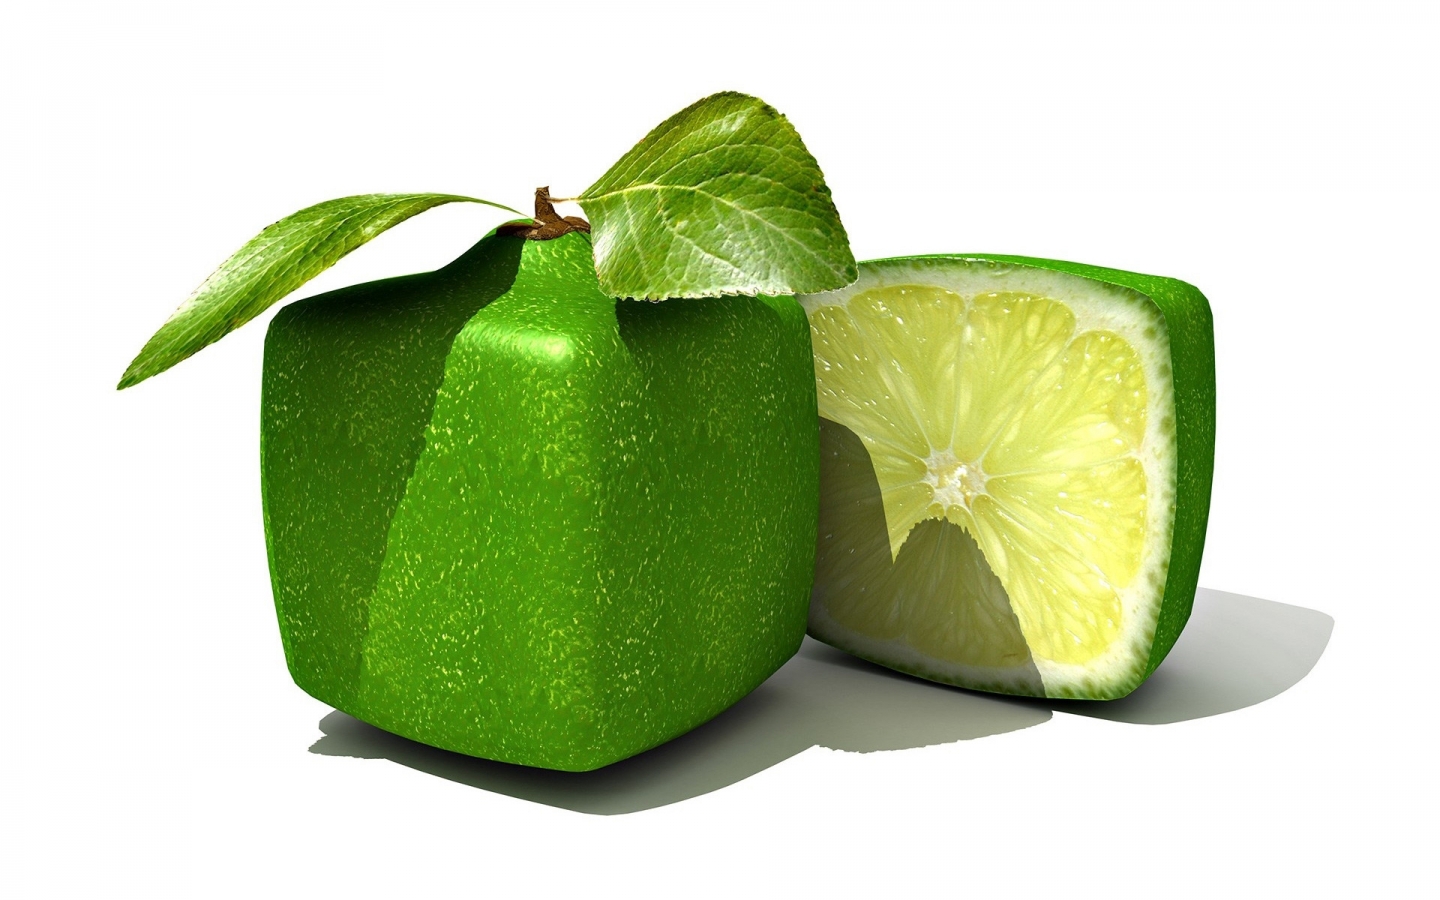 Square Limes for 1440 x 900 widescreen resolution